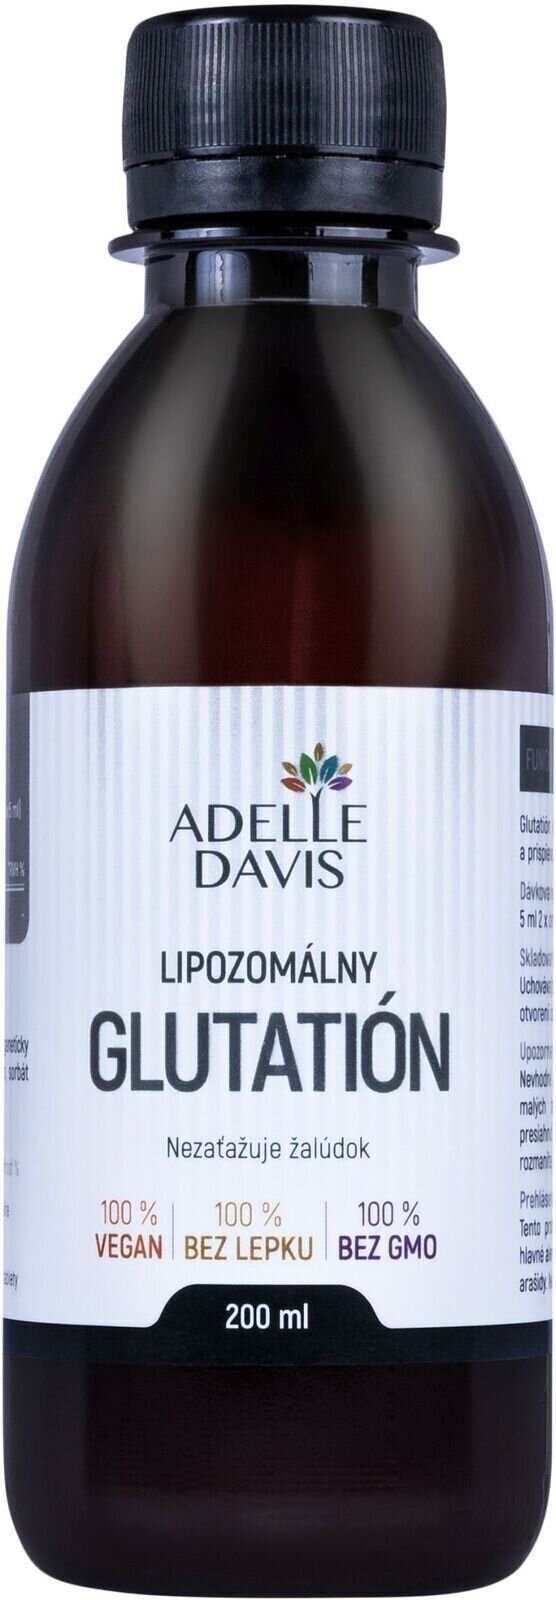 Antioxidants and natural extracts Adelle Davis Liposomal Glutathion 200 ml Antioxidants and natural extracts